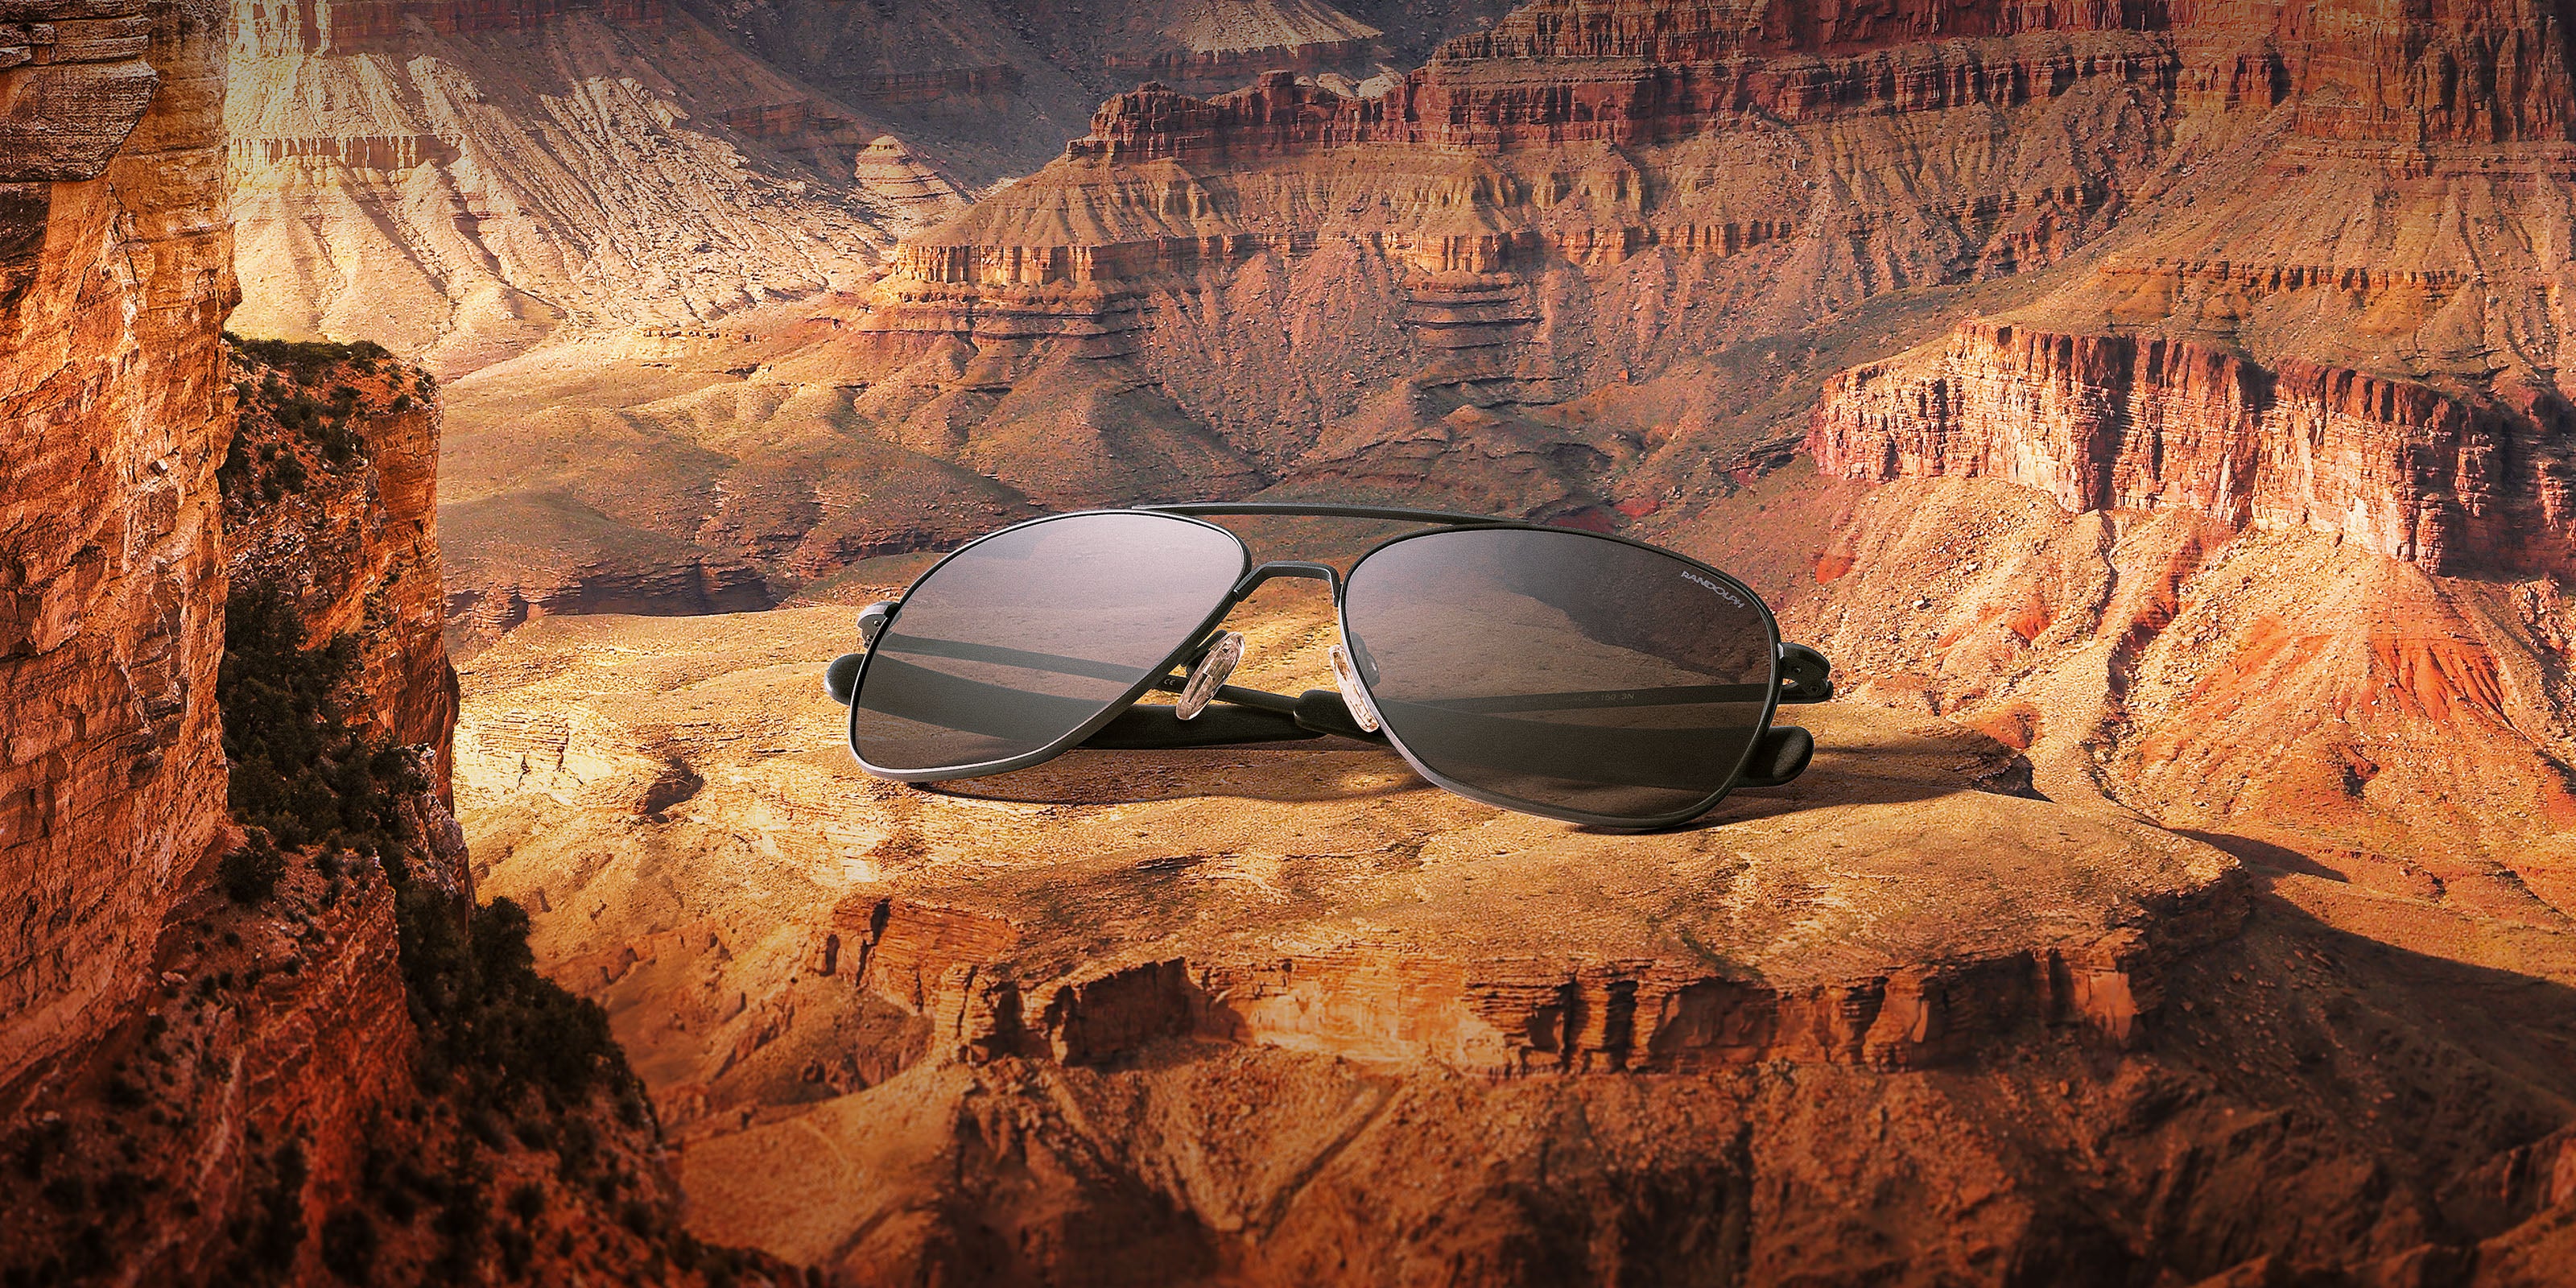 JUST LANDED: XL SUNGLASSES COLLECTION — OUR BIGGEST SUNGLASSES EVER ...